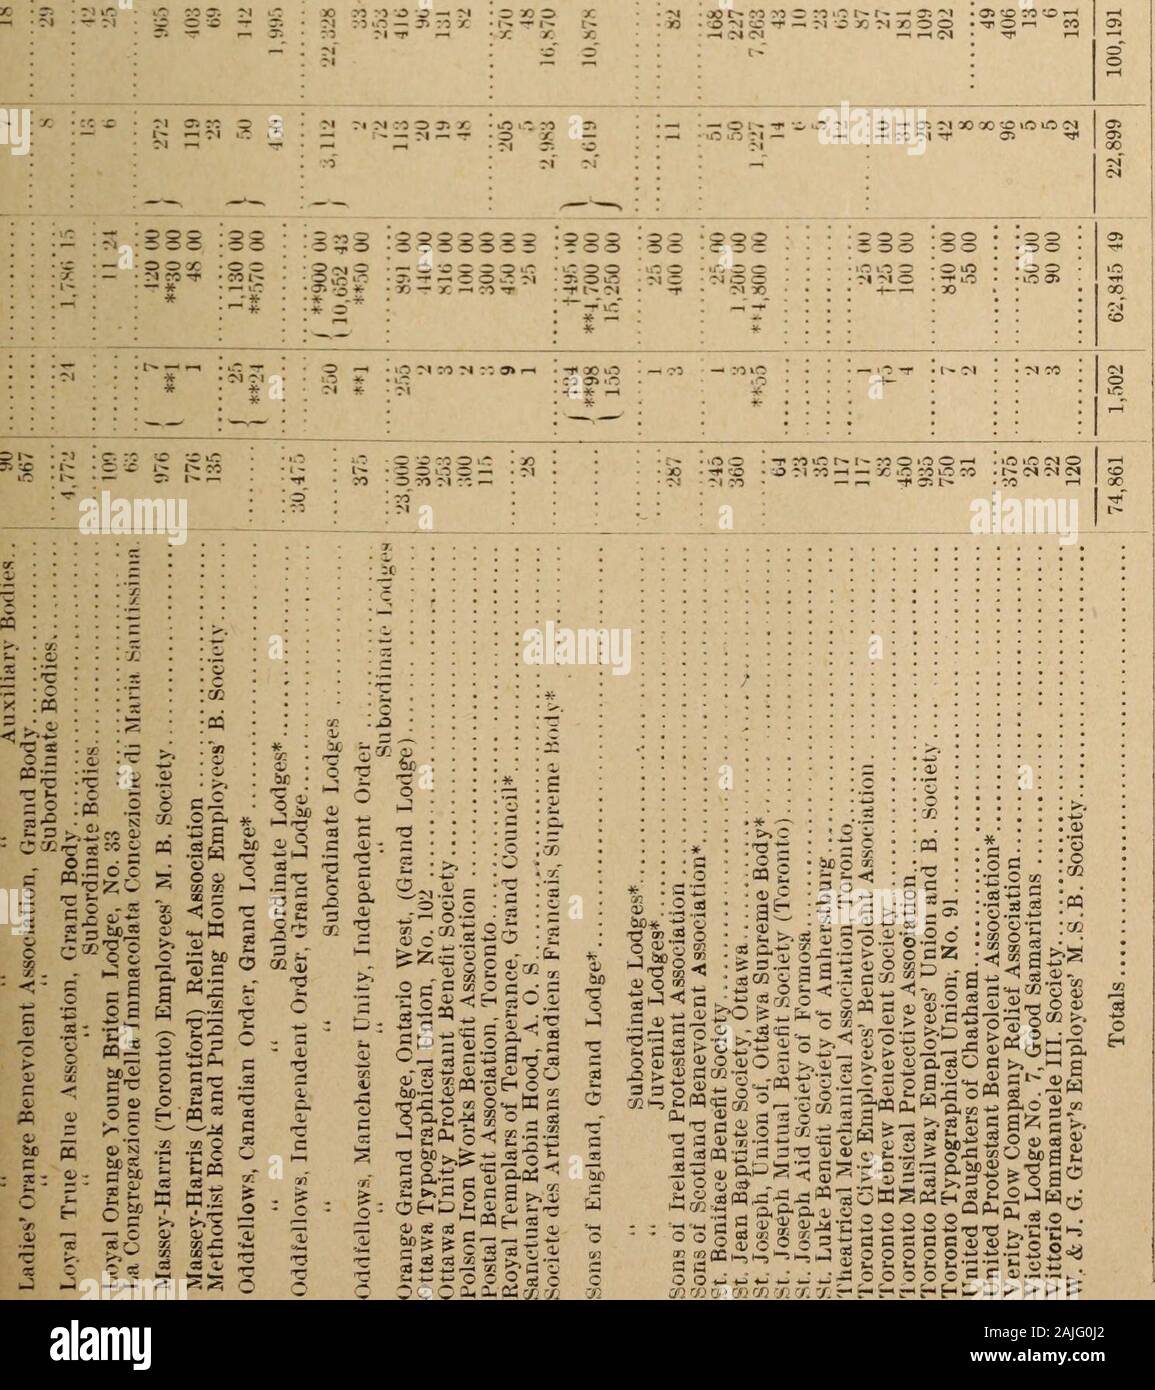 ANNUAL REPORT OF THE SUPERINTENDENT OF INSURANCE FOR THE PROVINCE OF ONTARIO for the year 1904 . © &gt;© • ? © S&gt; iC CC — ab co eo O «e T CO i— tC COJO -r CC CM ..t .rr o — ^ CO X i-T r-Tl-x i-4 CO oi X S S 35 X © CO ,.-c 8881 51&gt; © u- x © CCC-lIT cTcsf 18 © £ © II28SS :SS8:S88 x ^ r. — iC -r M —   — CI M ^ 2o o 5 £ &gt; &gt; © C ;3 O o 3£ .5 x £.2 5 £ = Sialyl 8 : . ,B a :5/. = ojjD&gt;c:j-.5 fe 3 g BPS S la* oe   t&gt; a sb O • icS S 03 U £ i. r — « x - -II 11= §1 a*x 5 11* : :«| : :: : : ilflfl 2li g-ol= = 9 P 03^- CO d ^ c -a - £5 bI g p 11 ;5s = 2 .= Hii-r WIS x - =h X f oV sis a = Stock Photo